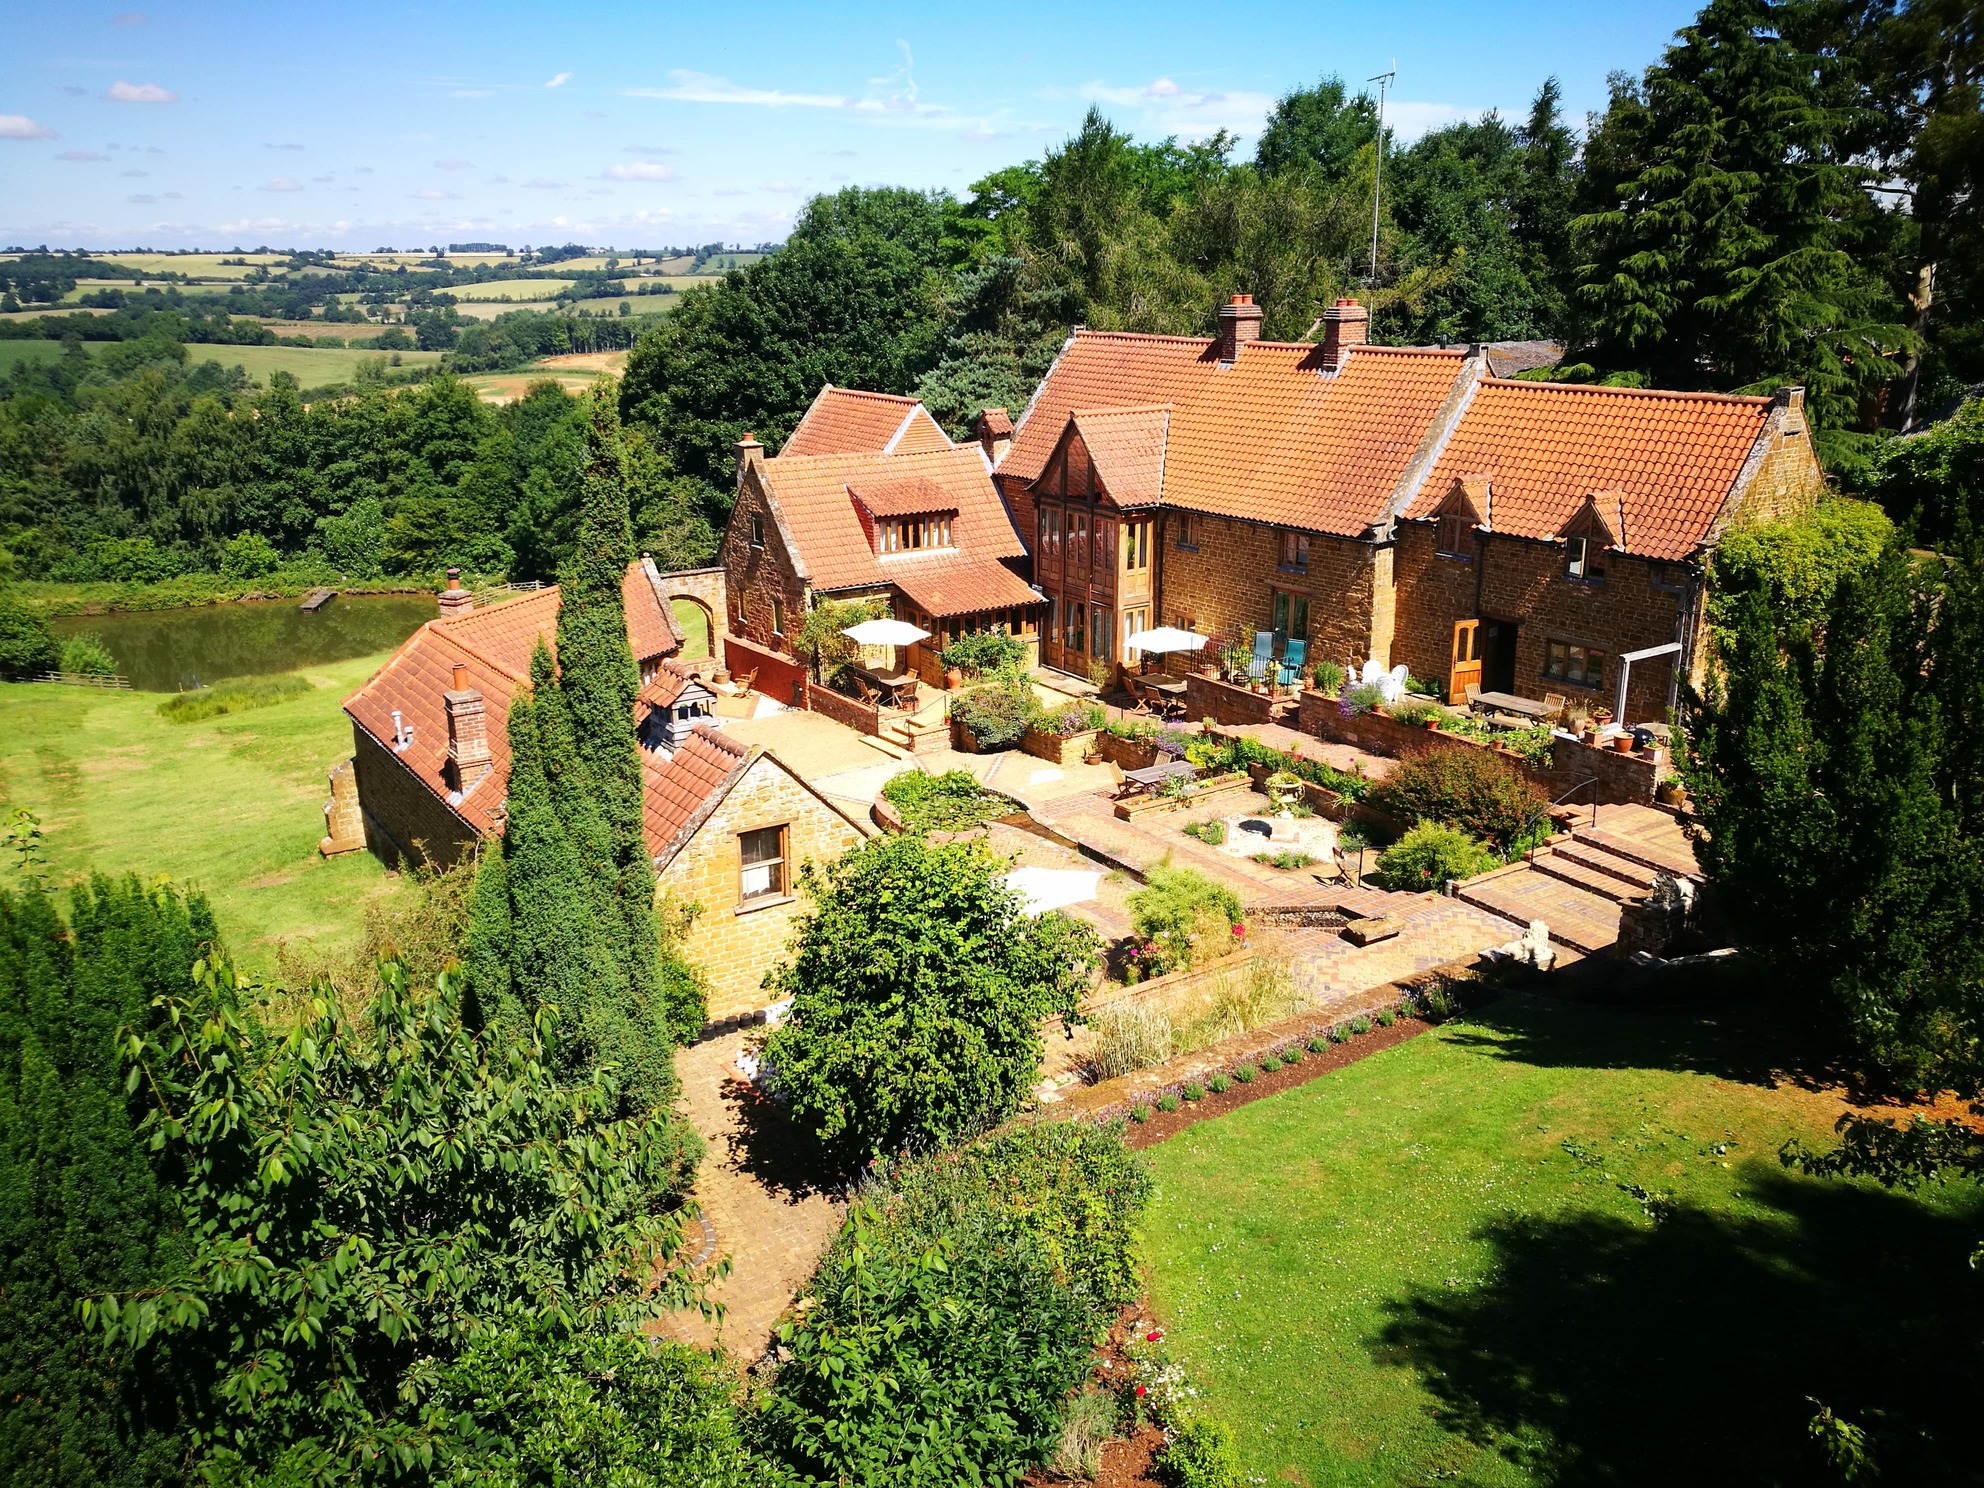 Luxury holiday cottages in the countryside